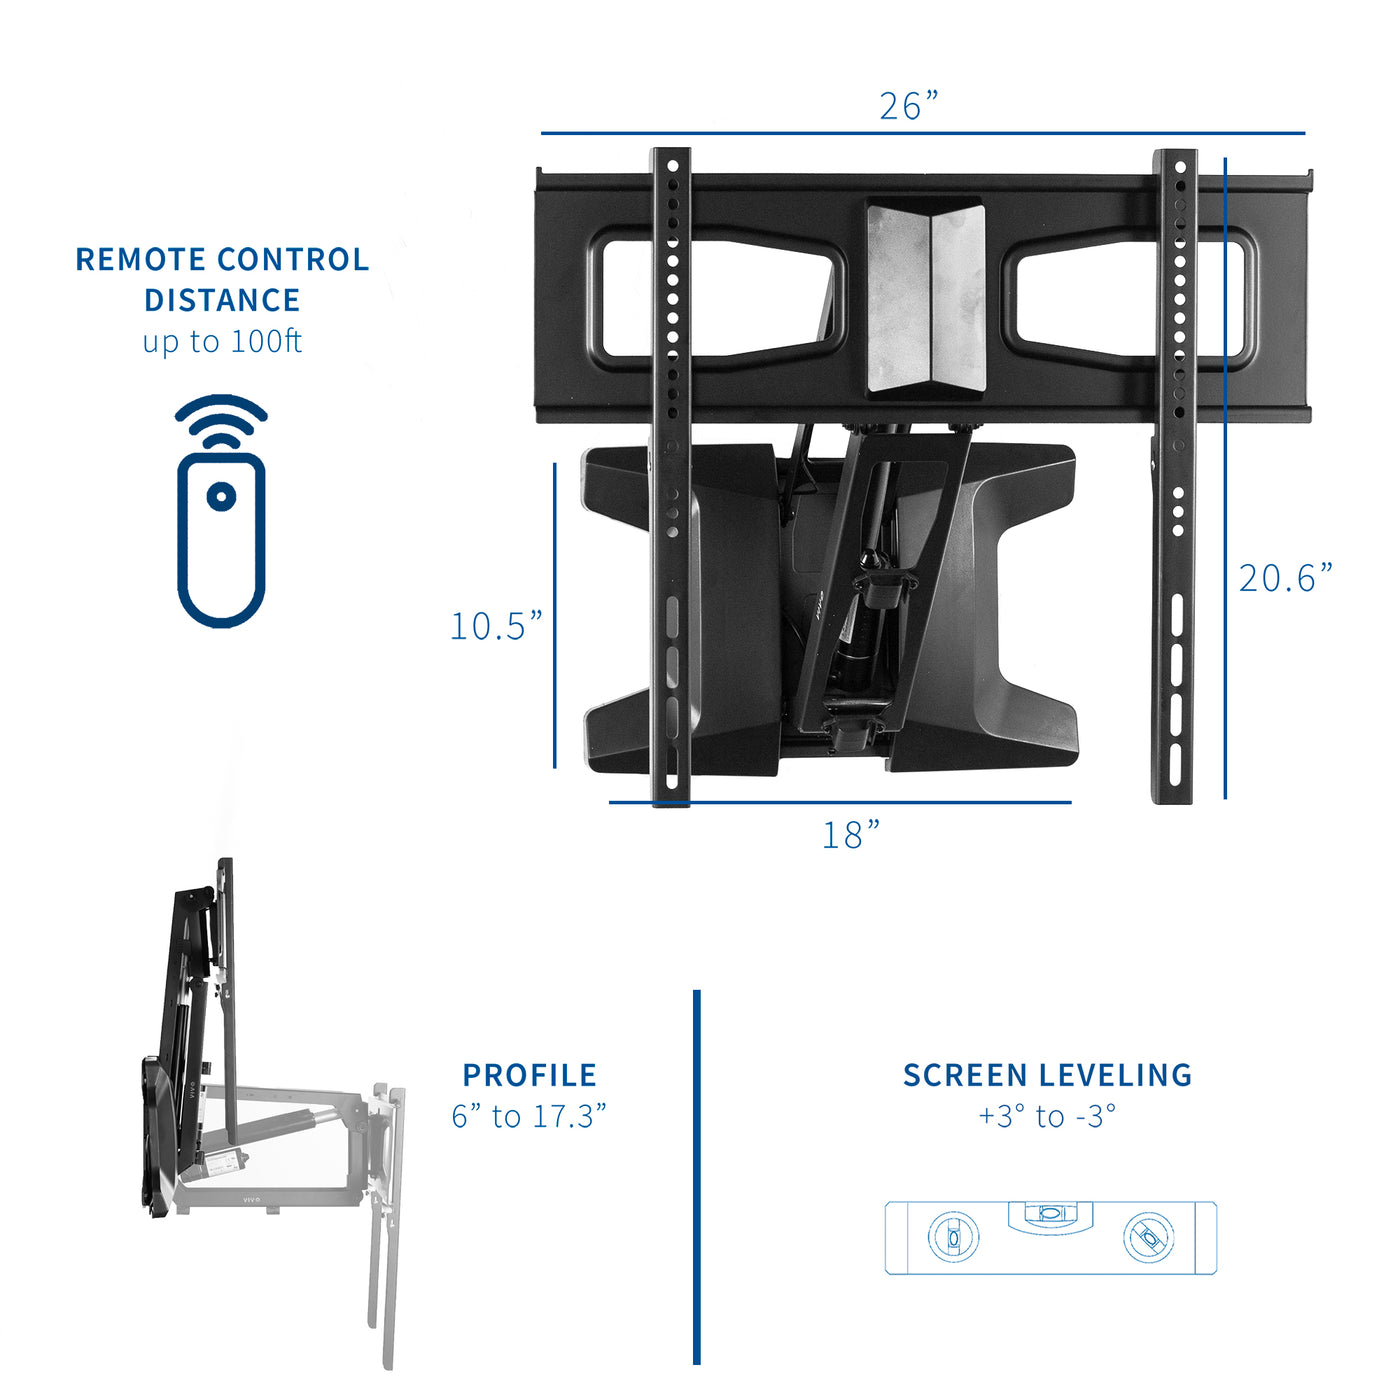 Remote control distance and mount specifications with a side profile and screen leveling.